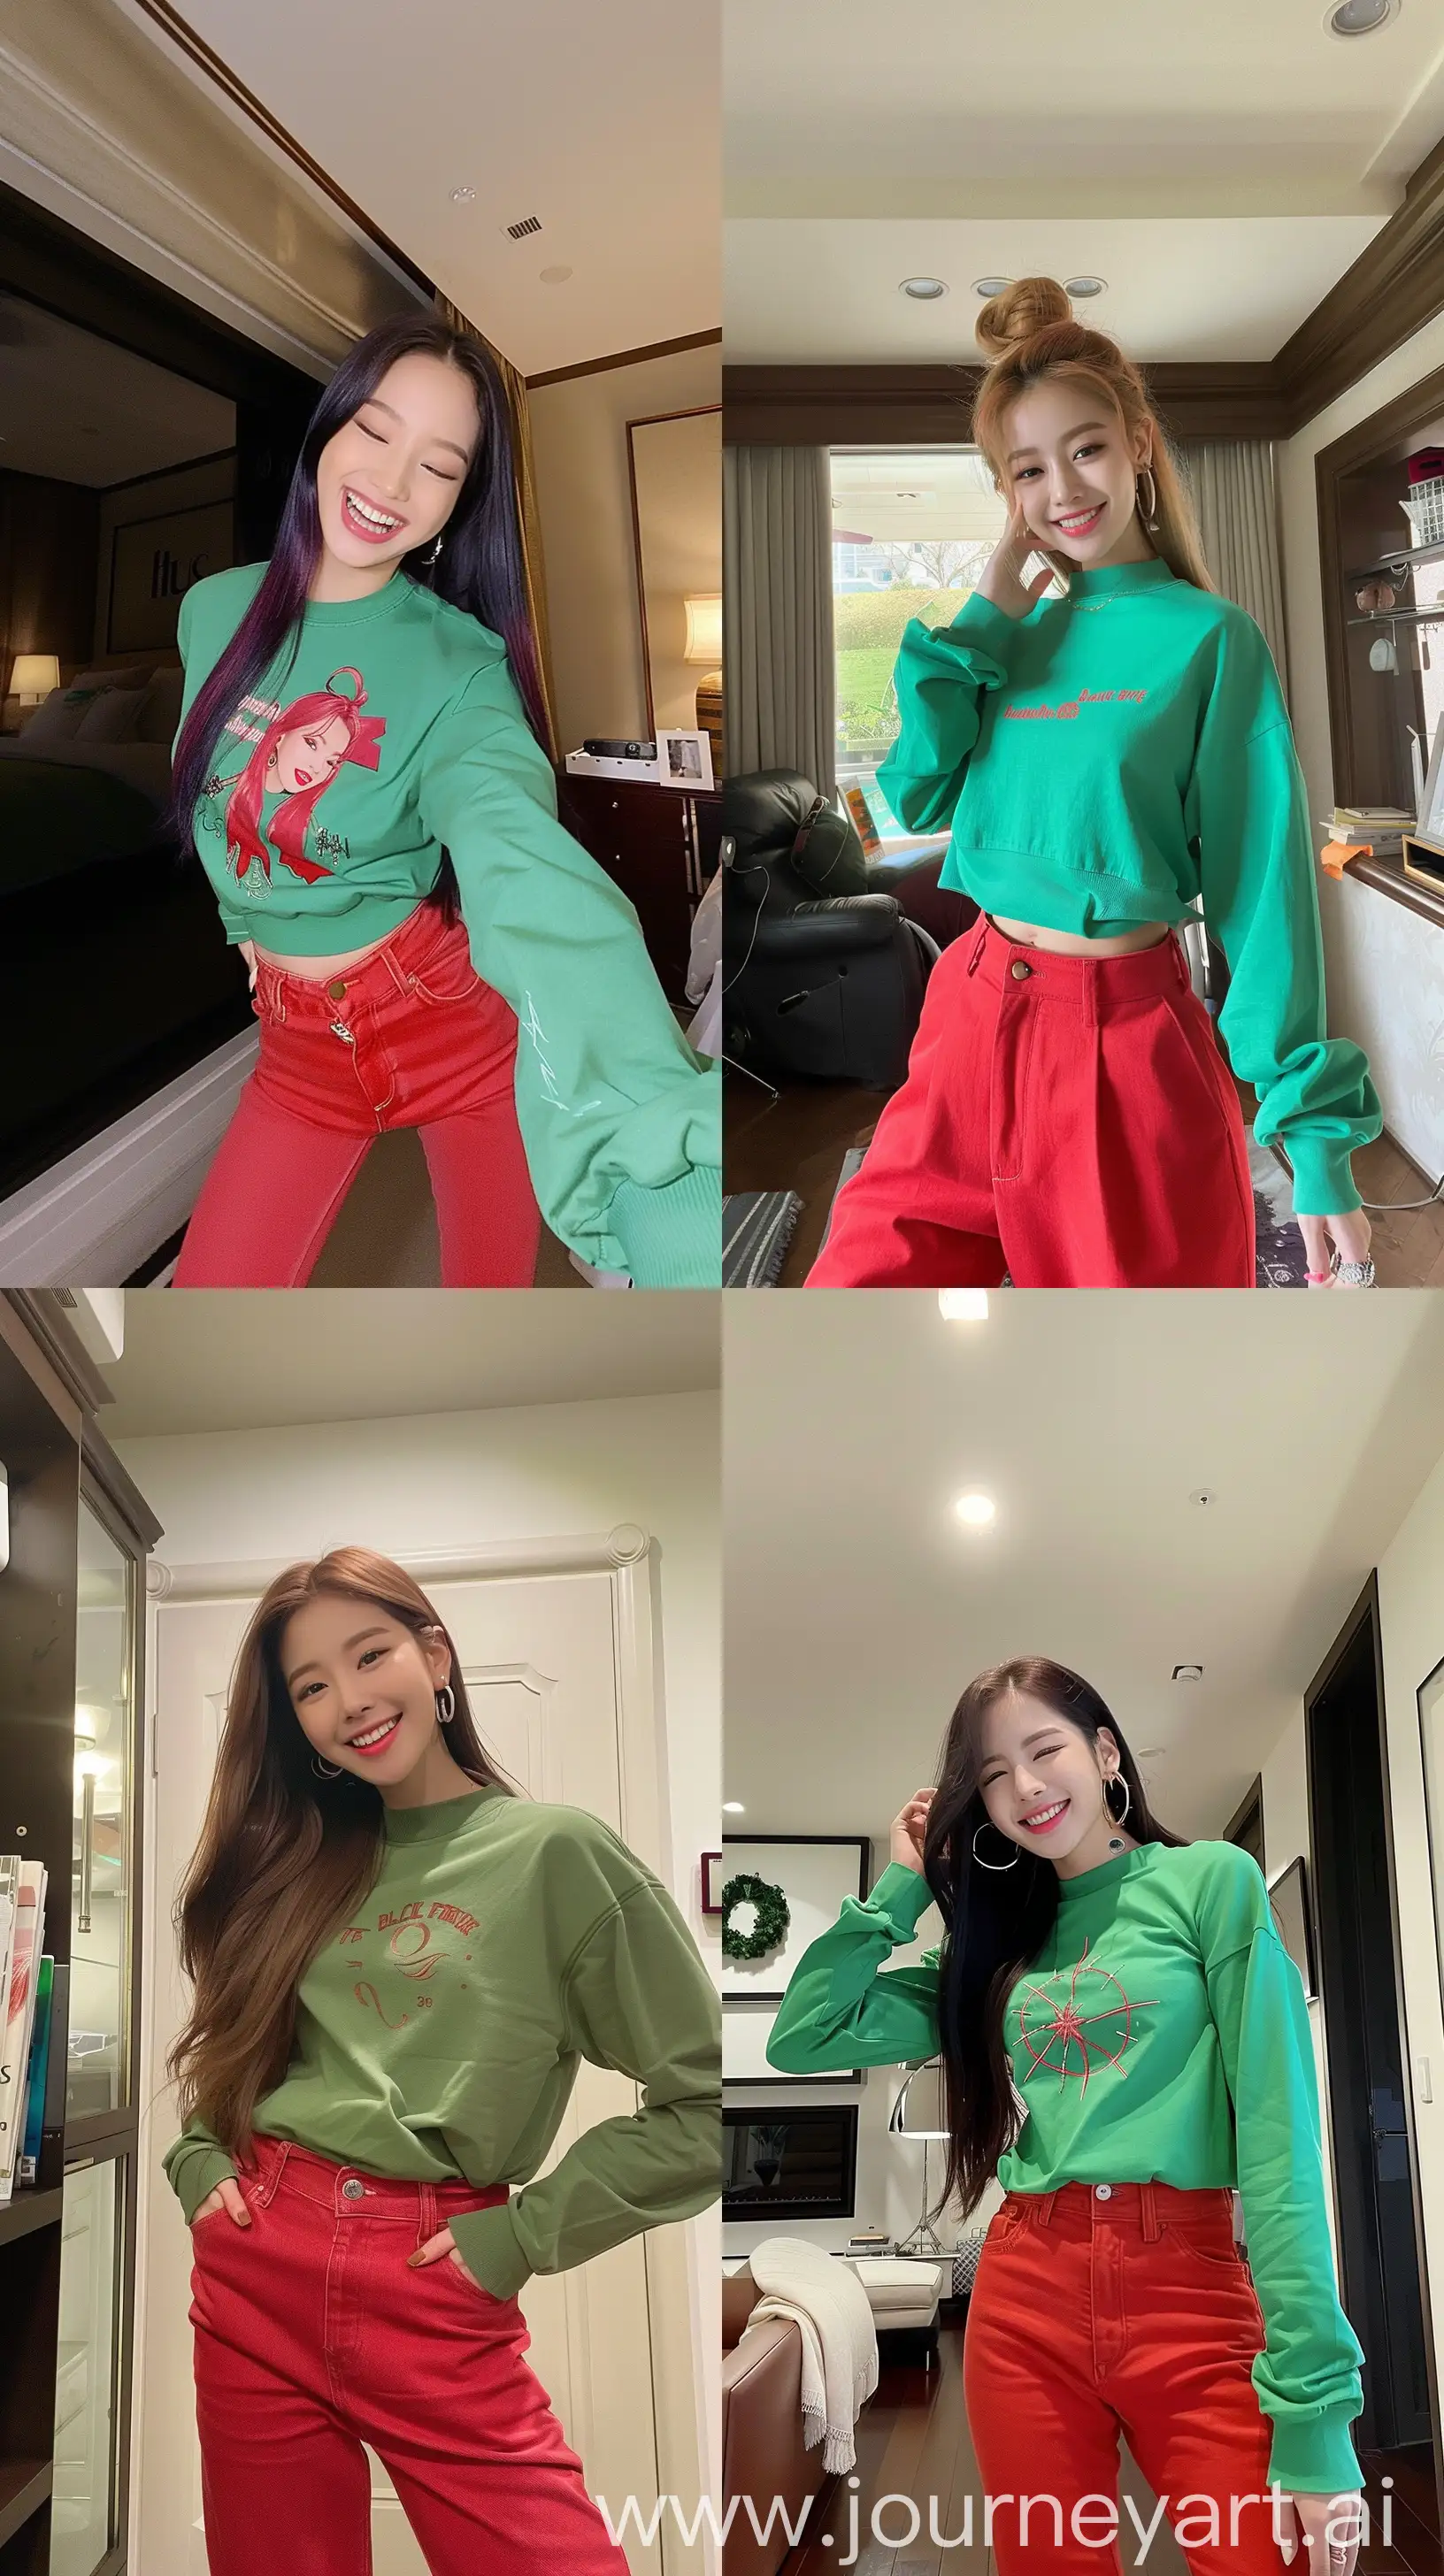 Jennie-from-Blackpink-Smiling-in-Green-Crewneck-and-Red-Pants-Selfie